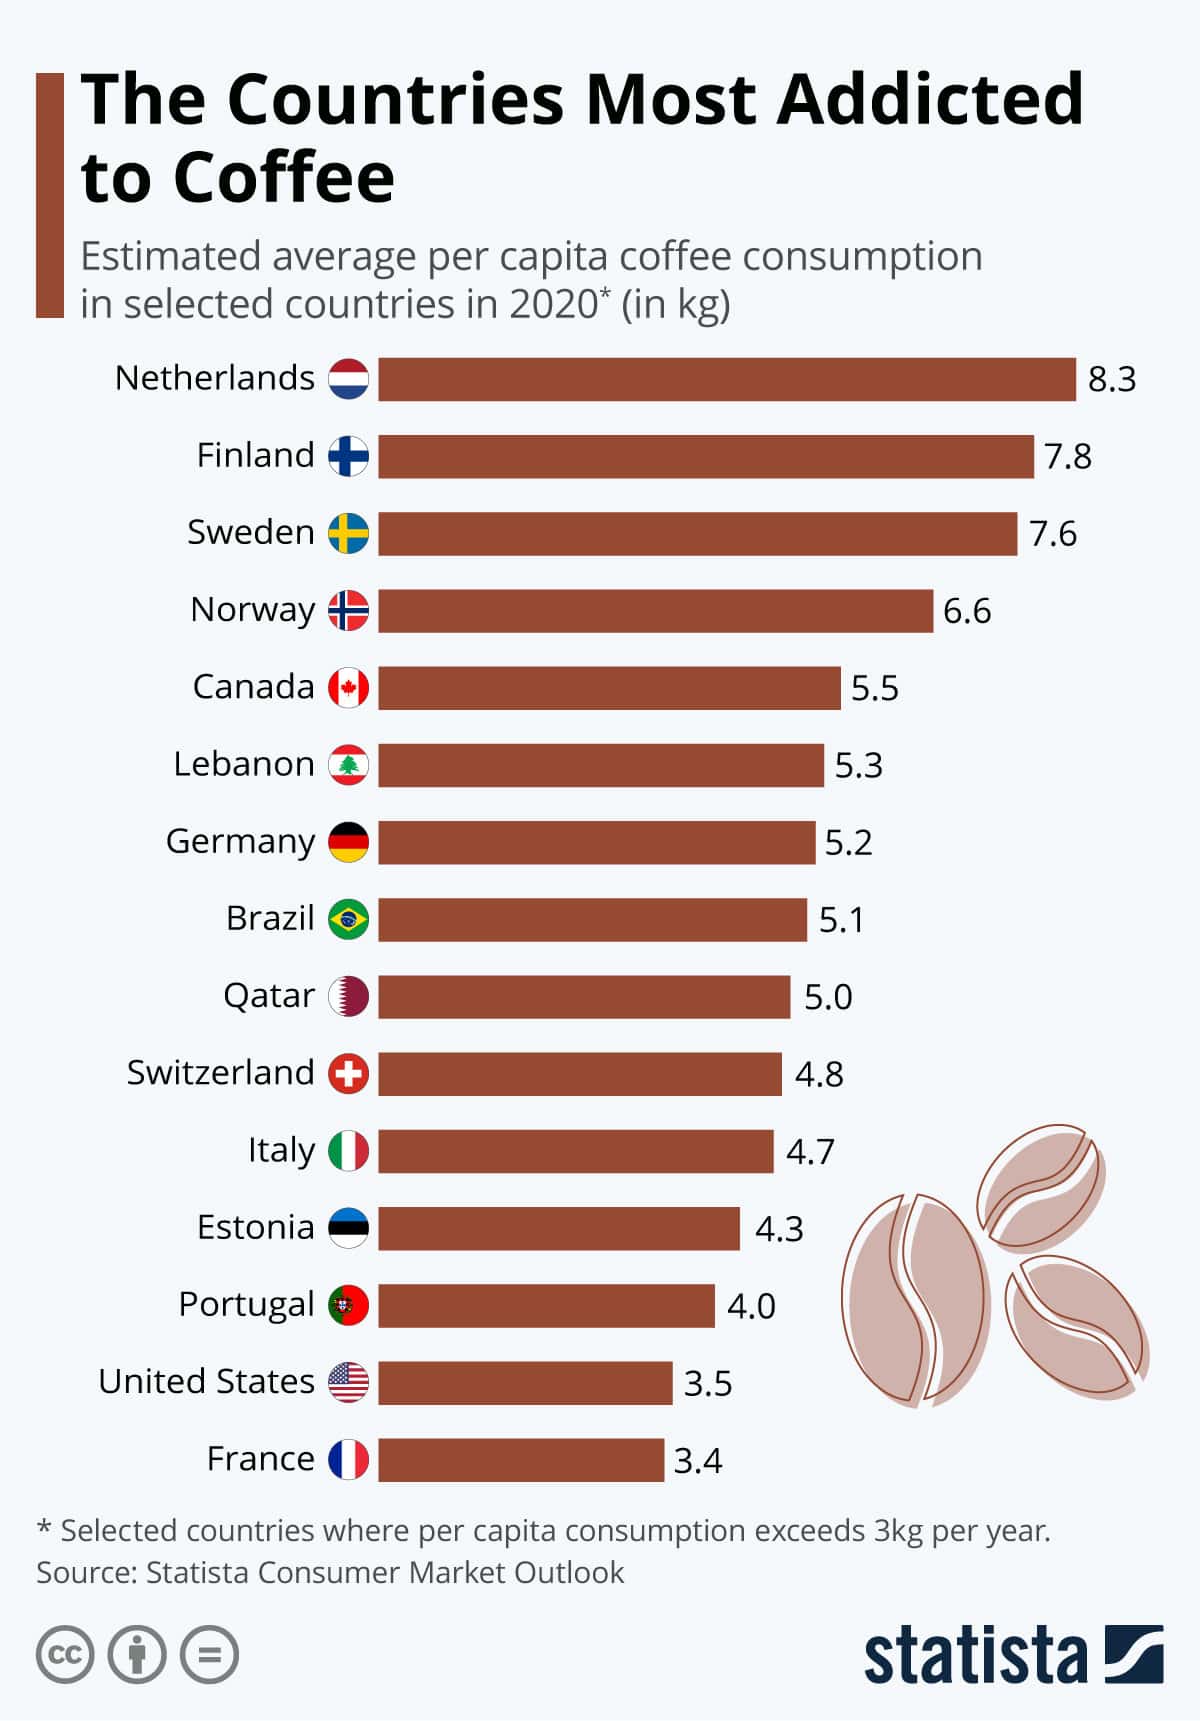 Chart showing per capita coffee consumption by country in 2020